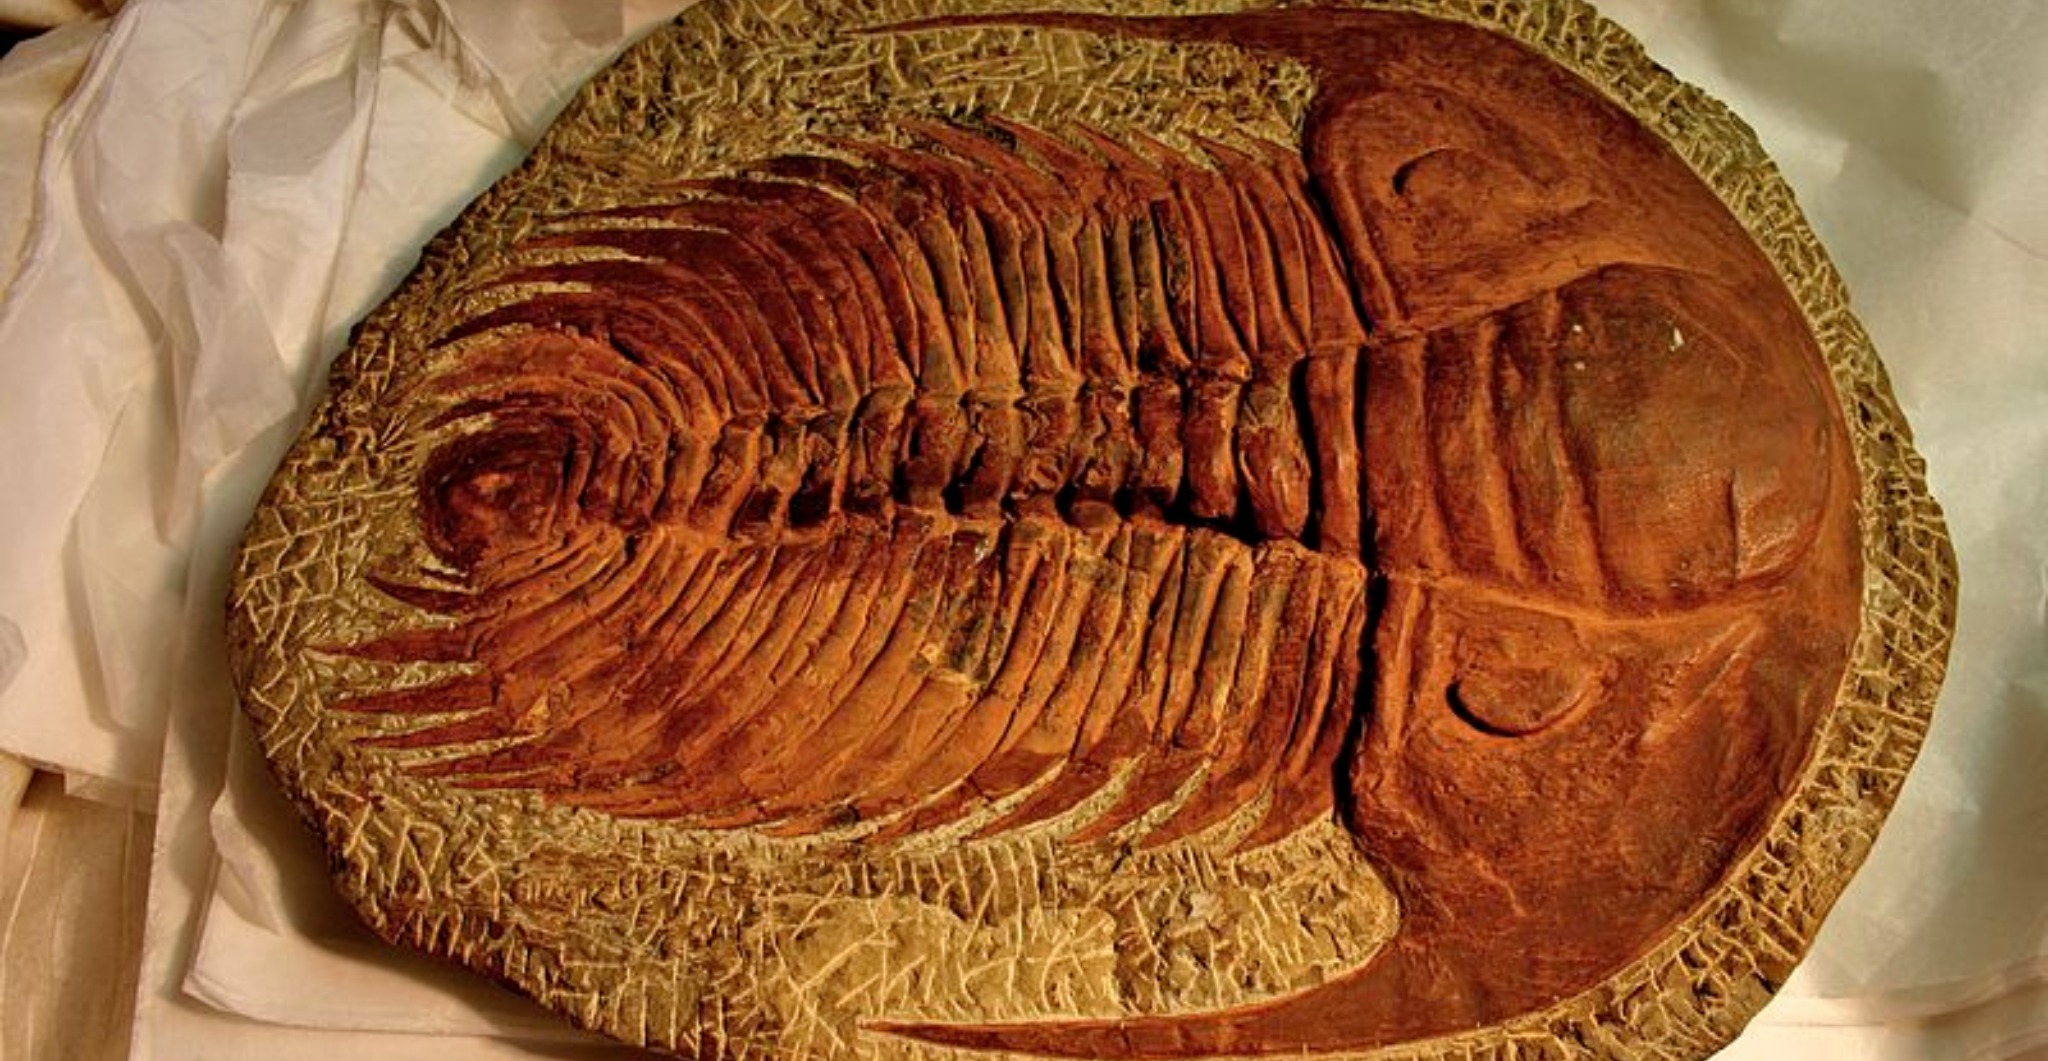 A large trilobite from about 500 million years ago (Middle Cambrian). This is not the fossilized brain. Photo by Mike Peel CC by 2.0